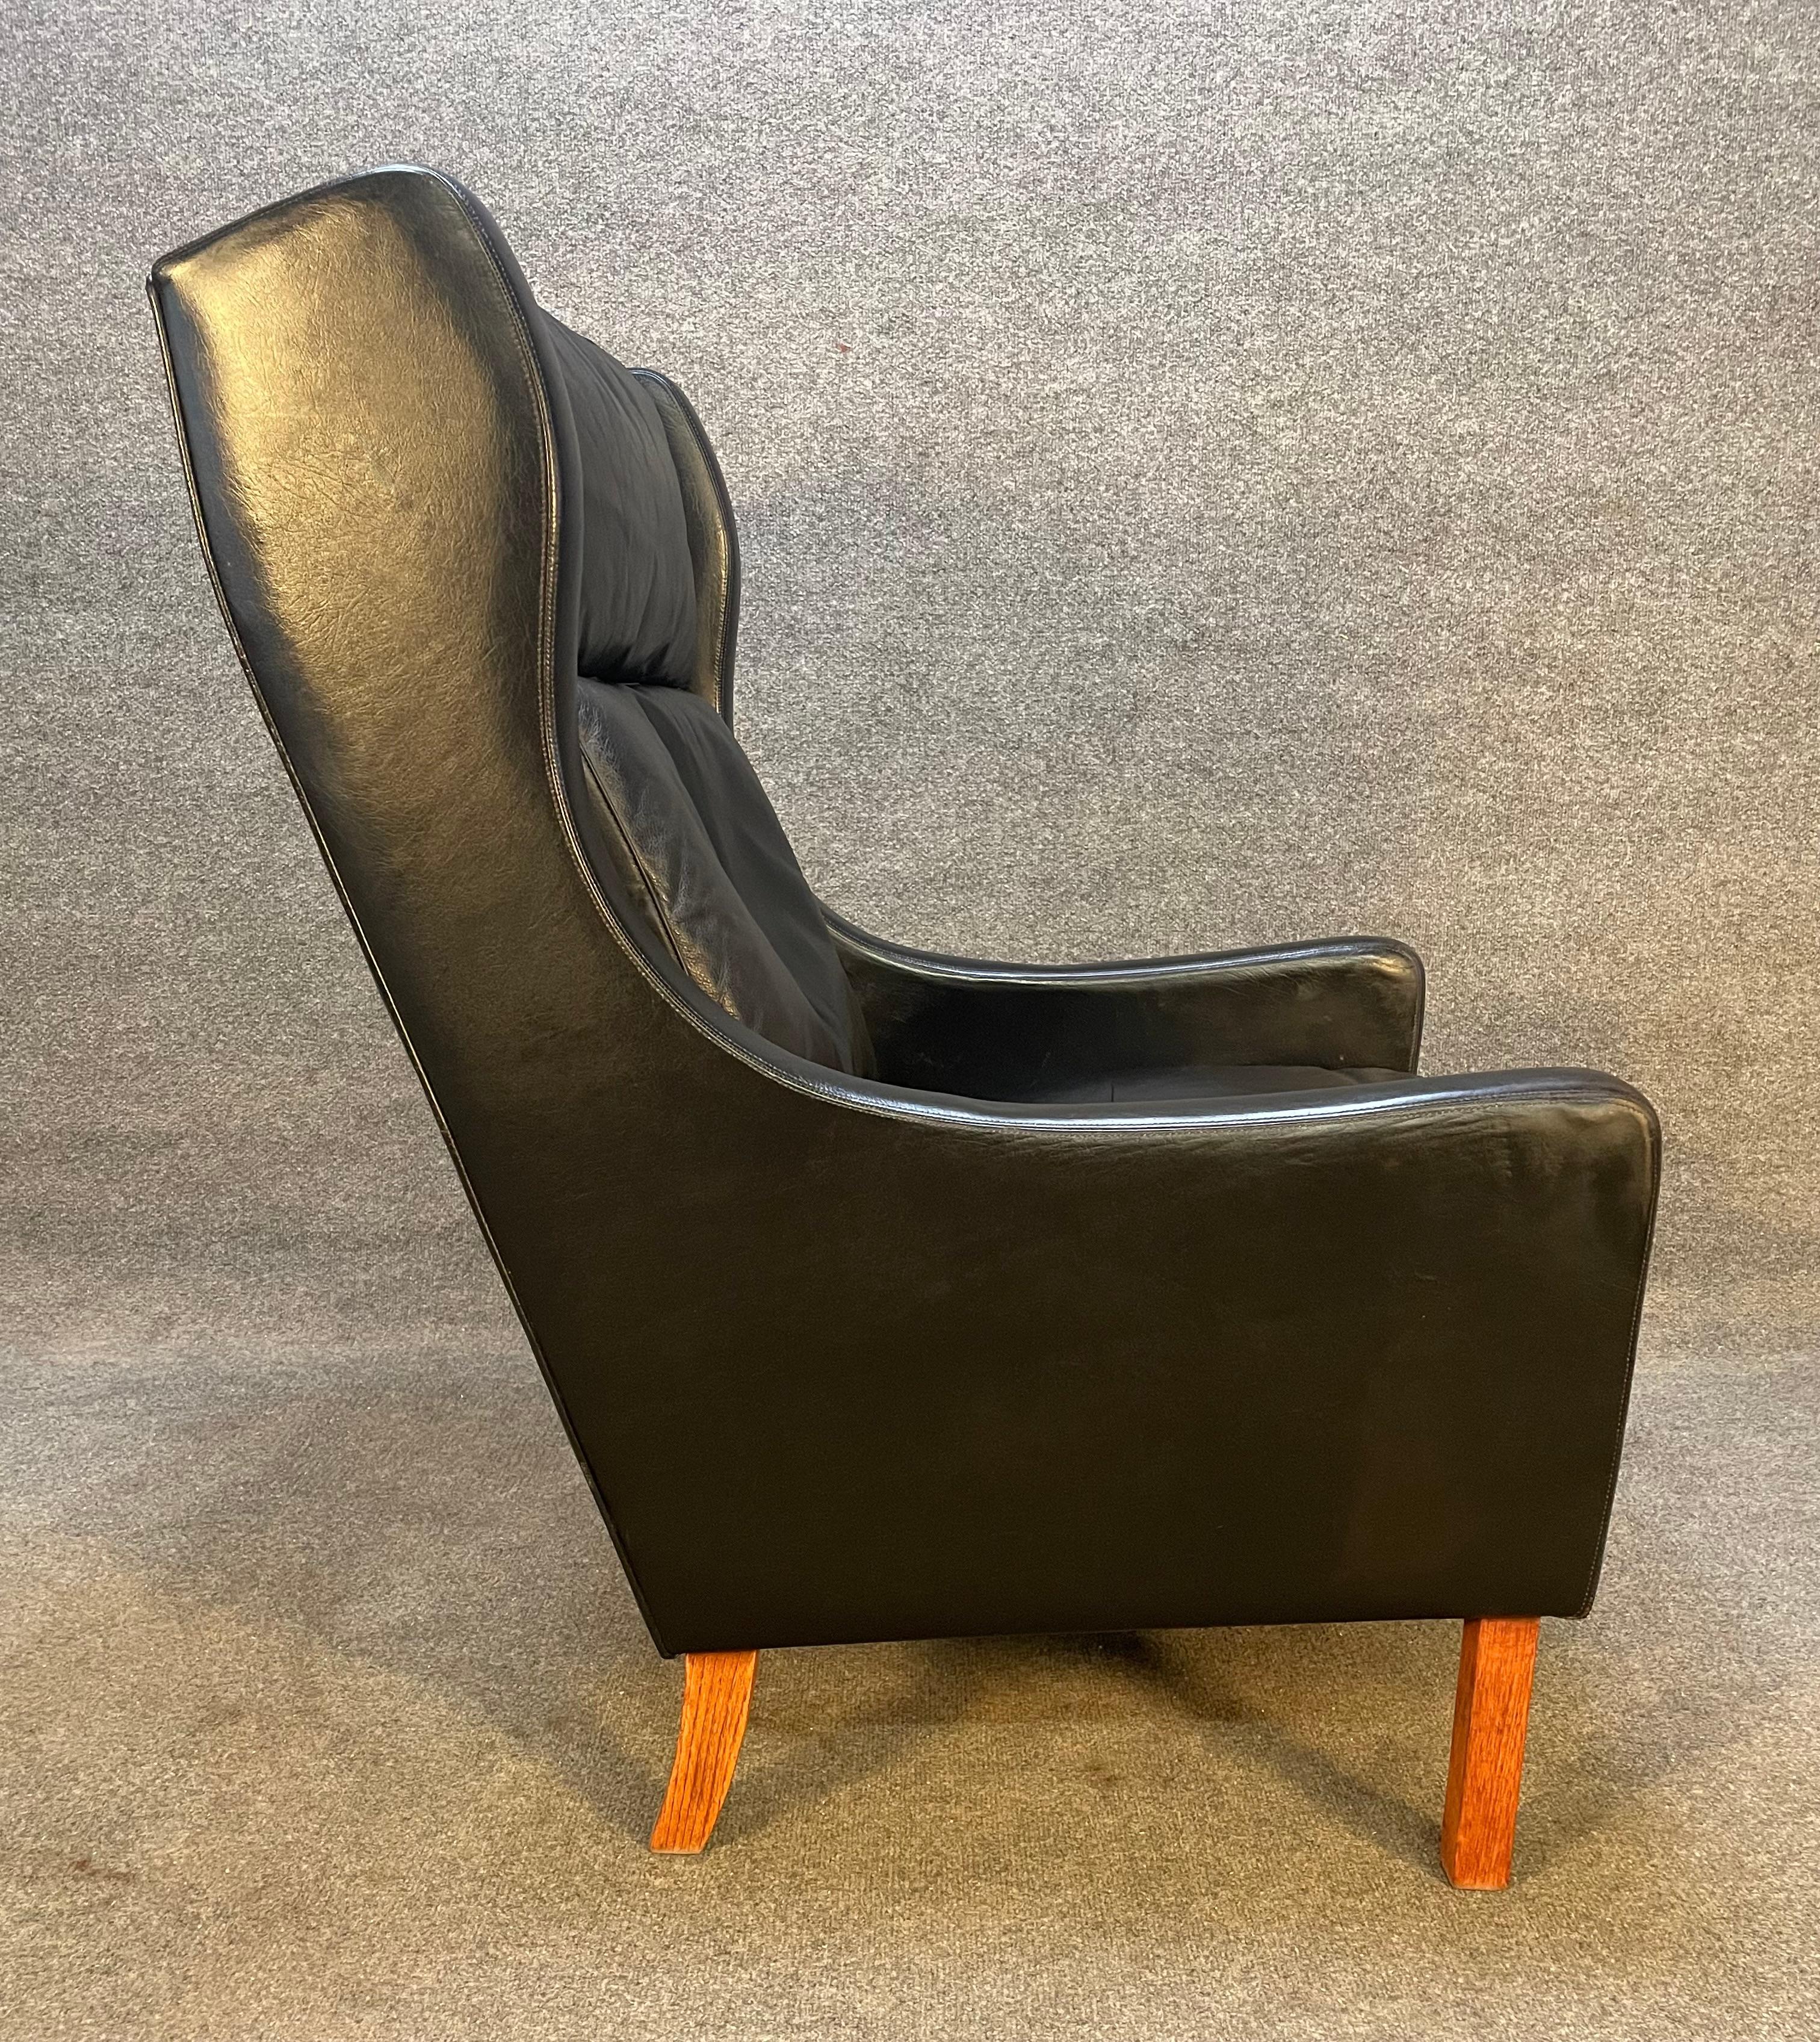 Here is a beautiful 1960's scandinavian modern easy chair in black leather attributed to famed Swedish designer Borge Mogensen.
This comfortable lounge chair, recently imported from Europe to California, features a well patined leather and four